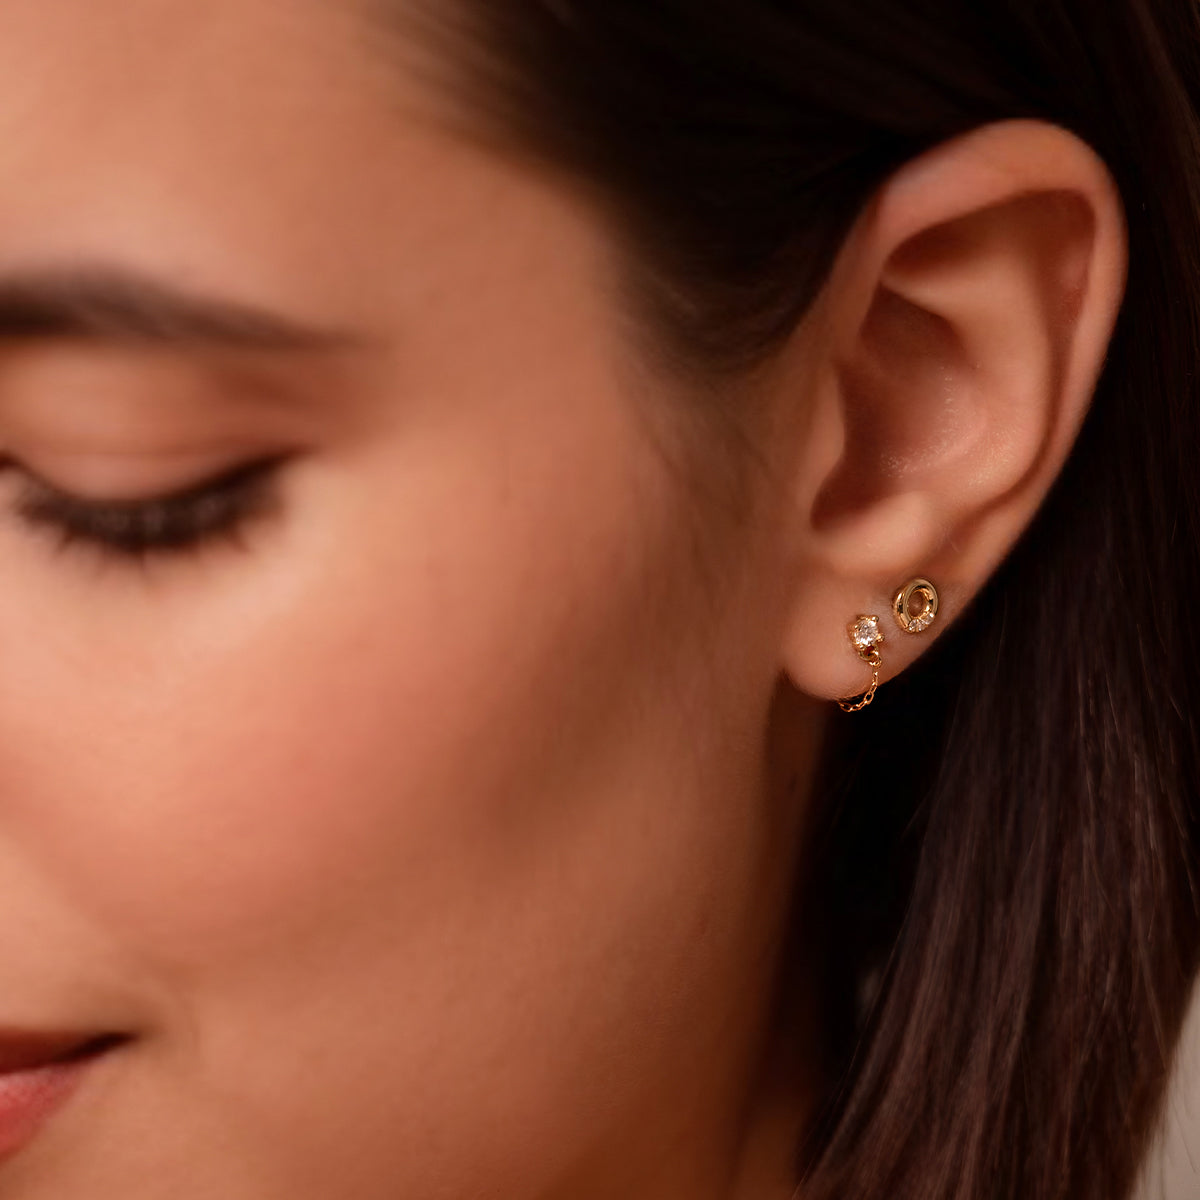 Earrings - Single earring with bridge chain and lab-grown diamond - ORO18KT - 2 | Rue des Mille